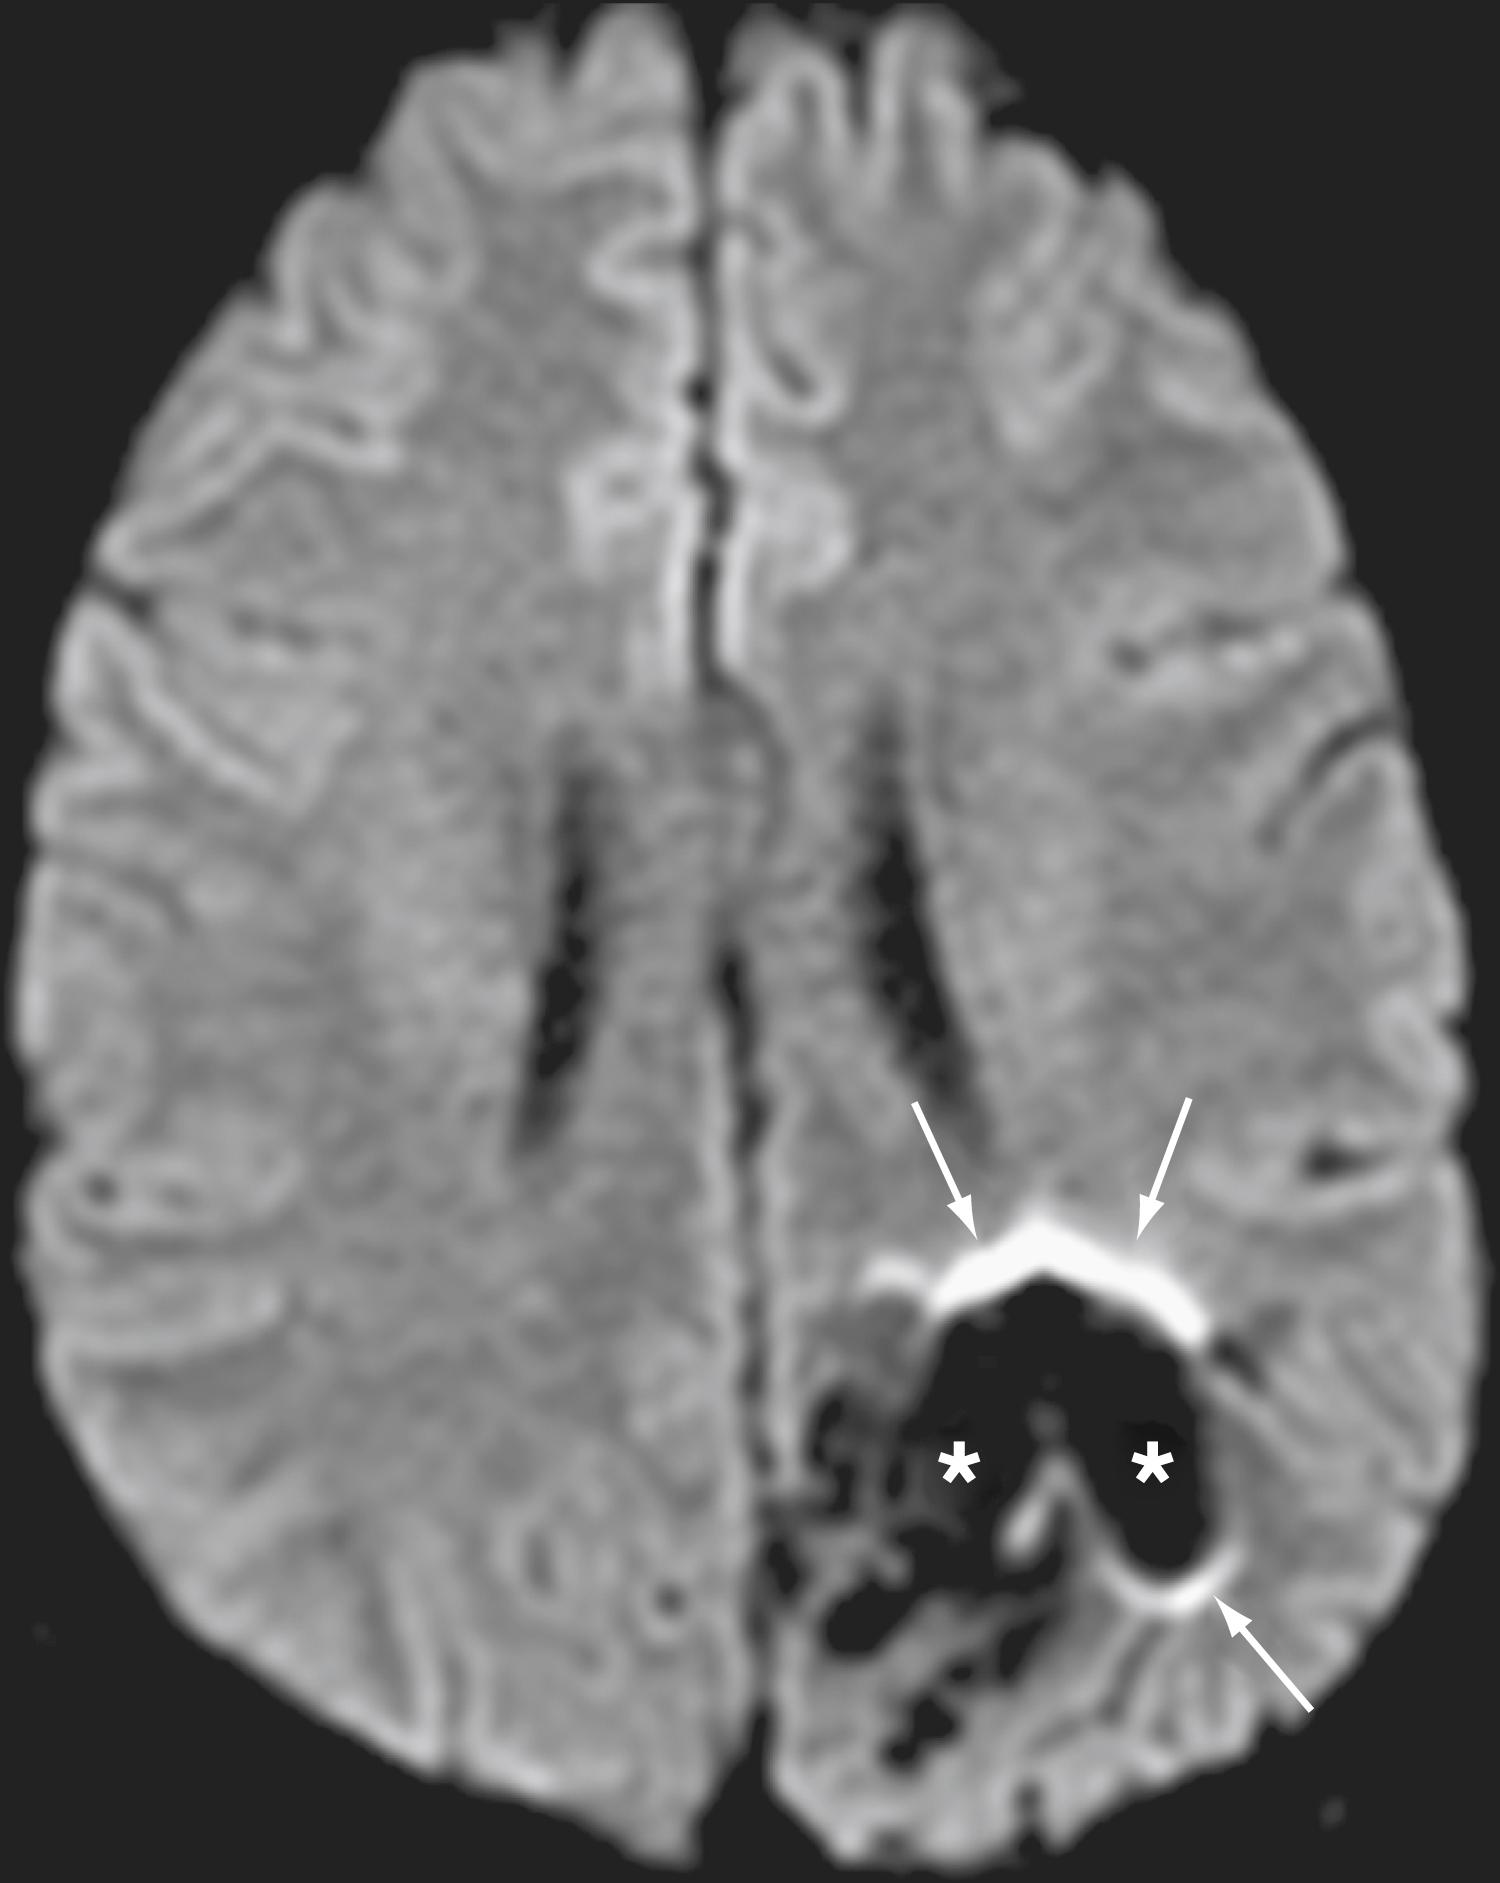 Figure 12.3, Axial diffusion-weighted image shows diminished signal around an arteriovenous malformation, which had been embolized previously. There is significant signal loss within the embolized bed (asterisks) and a halo of high signal distortion around the margin of the embolized nidus (arrows) . Serpiginous low signal at the posteromedial aspect of the lesion could represent flow voids resulting from residual patent vessels or susceptibility artifact.